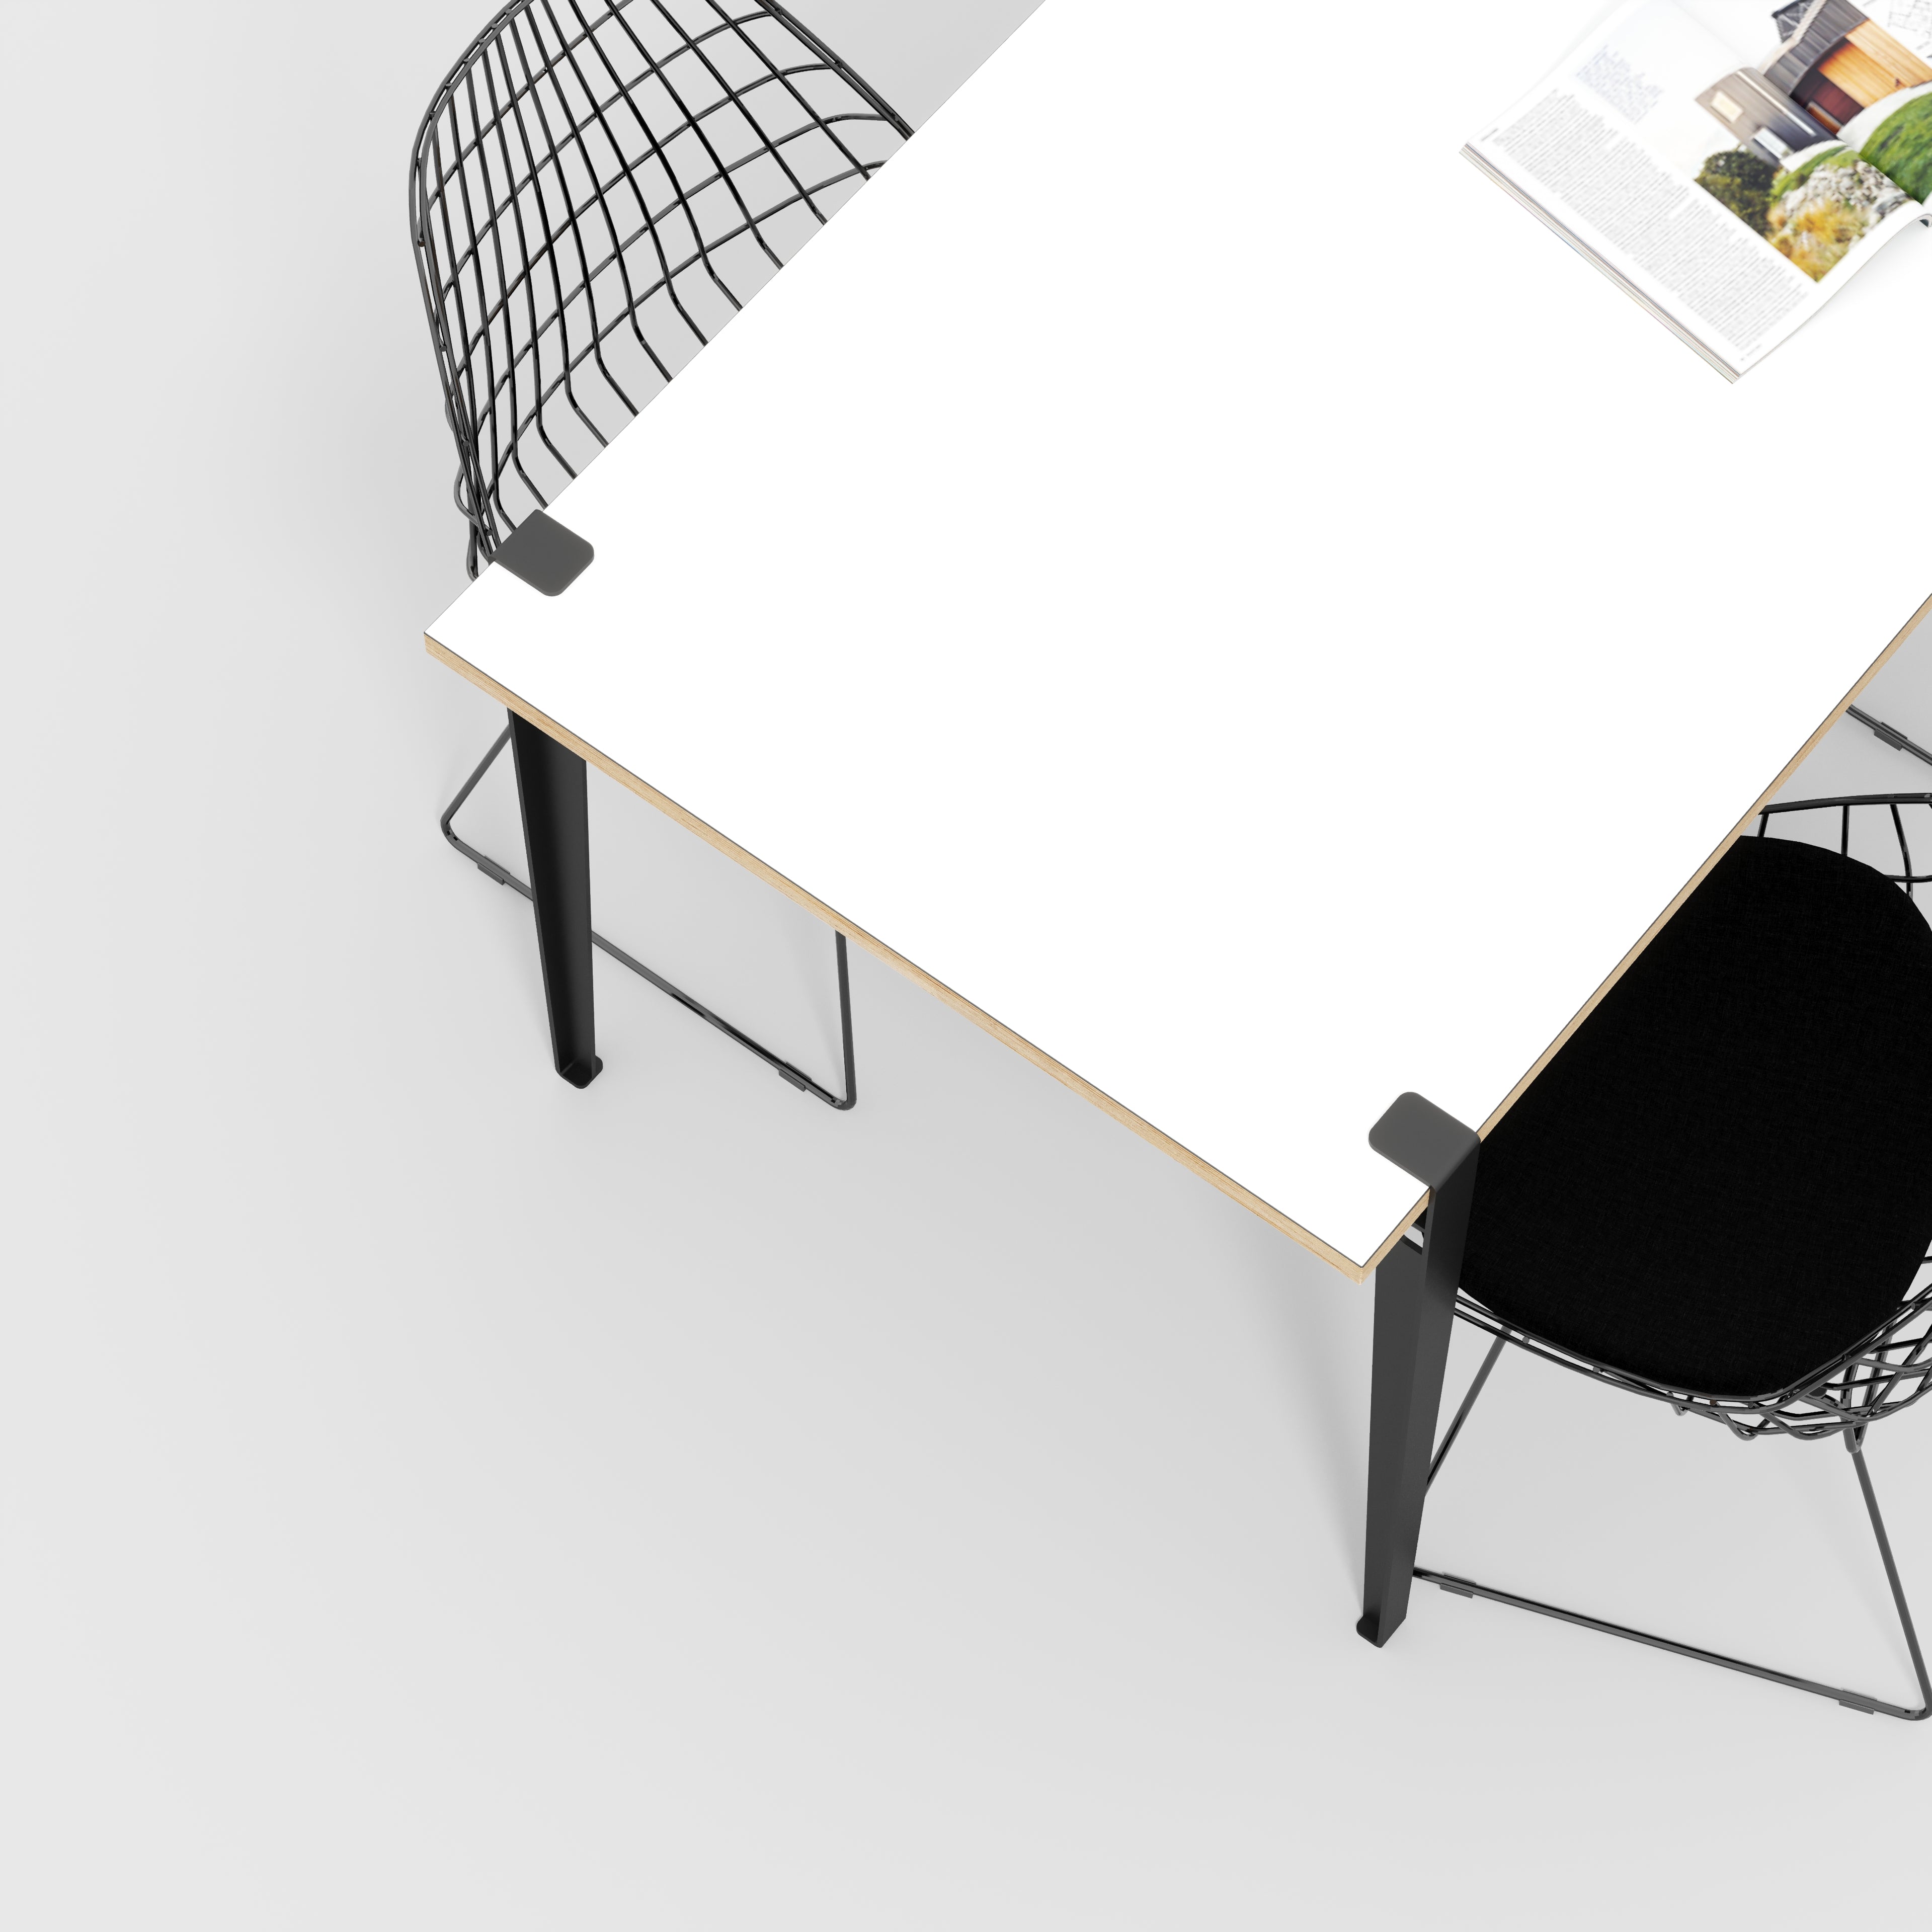 Table with Black Tiptoe Legs - Formica White - 1600(w) x 800(d) x 750(h)